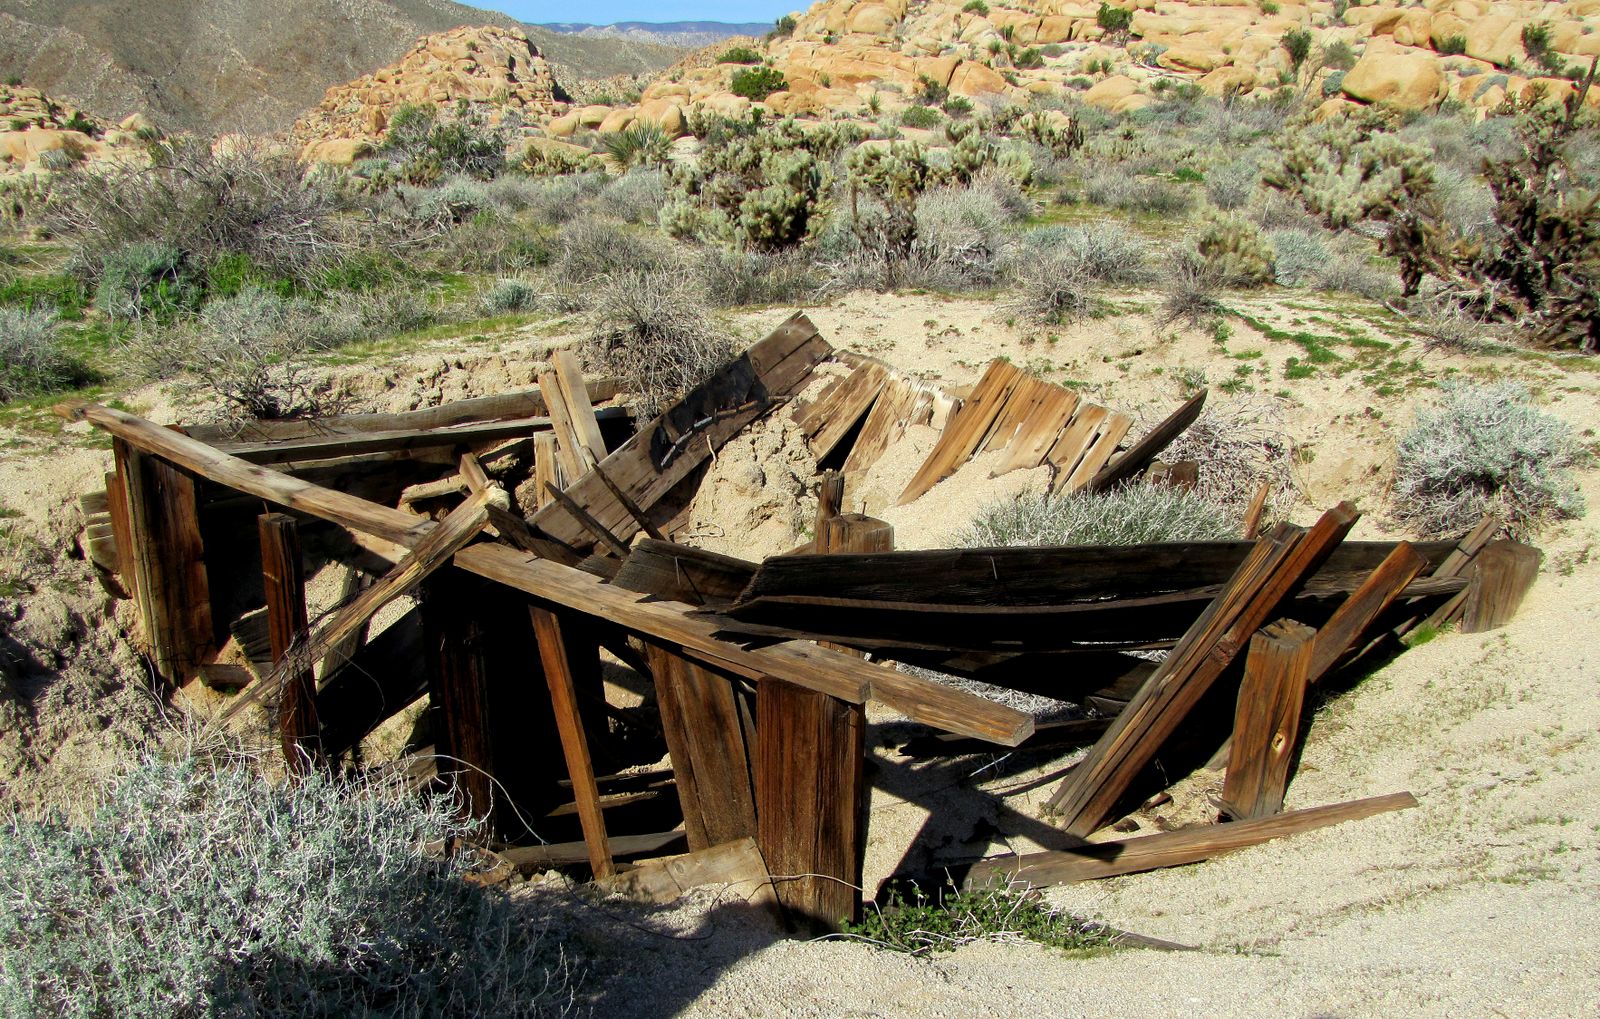 Remains of the Railroad Construction Camp.